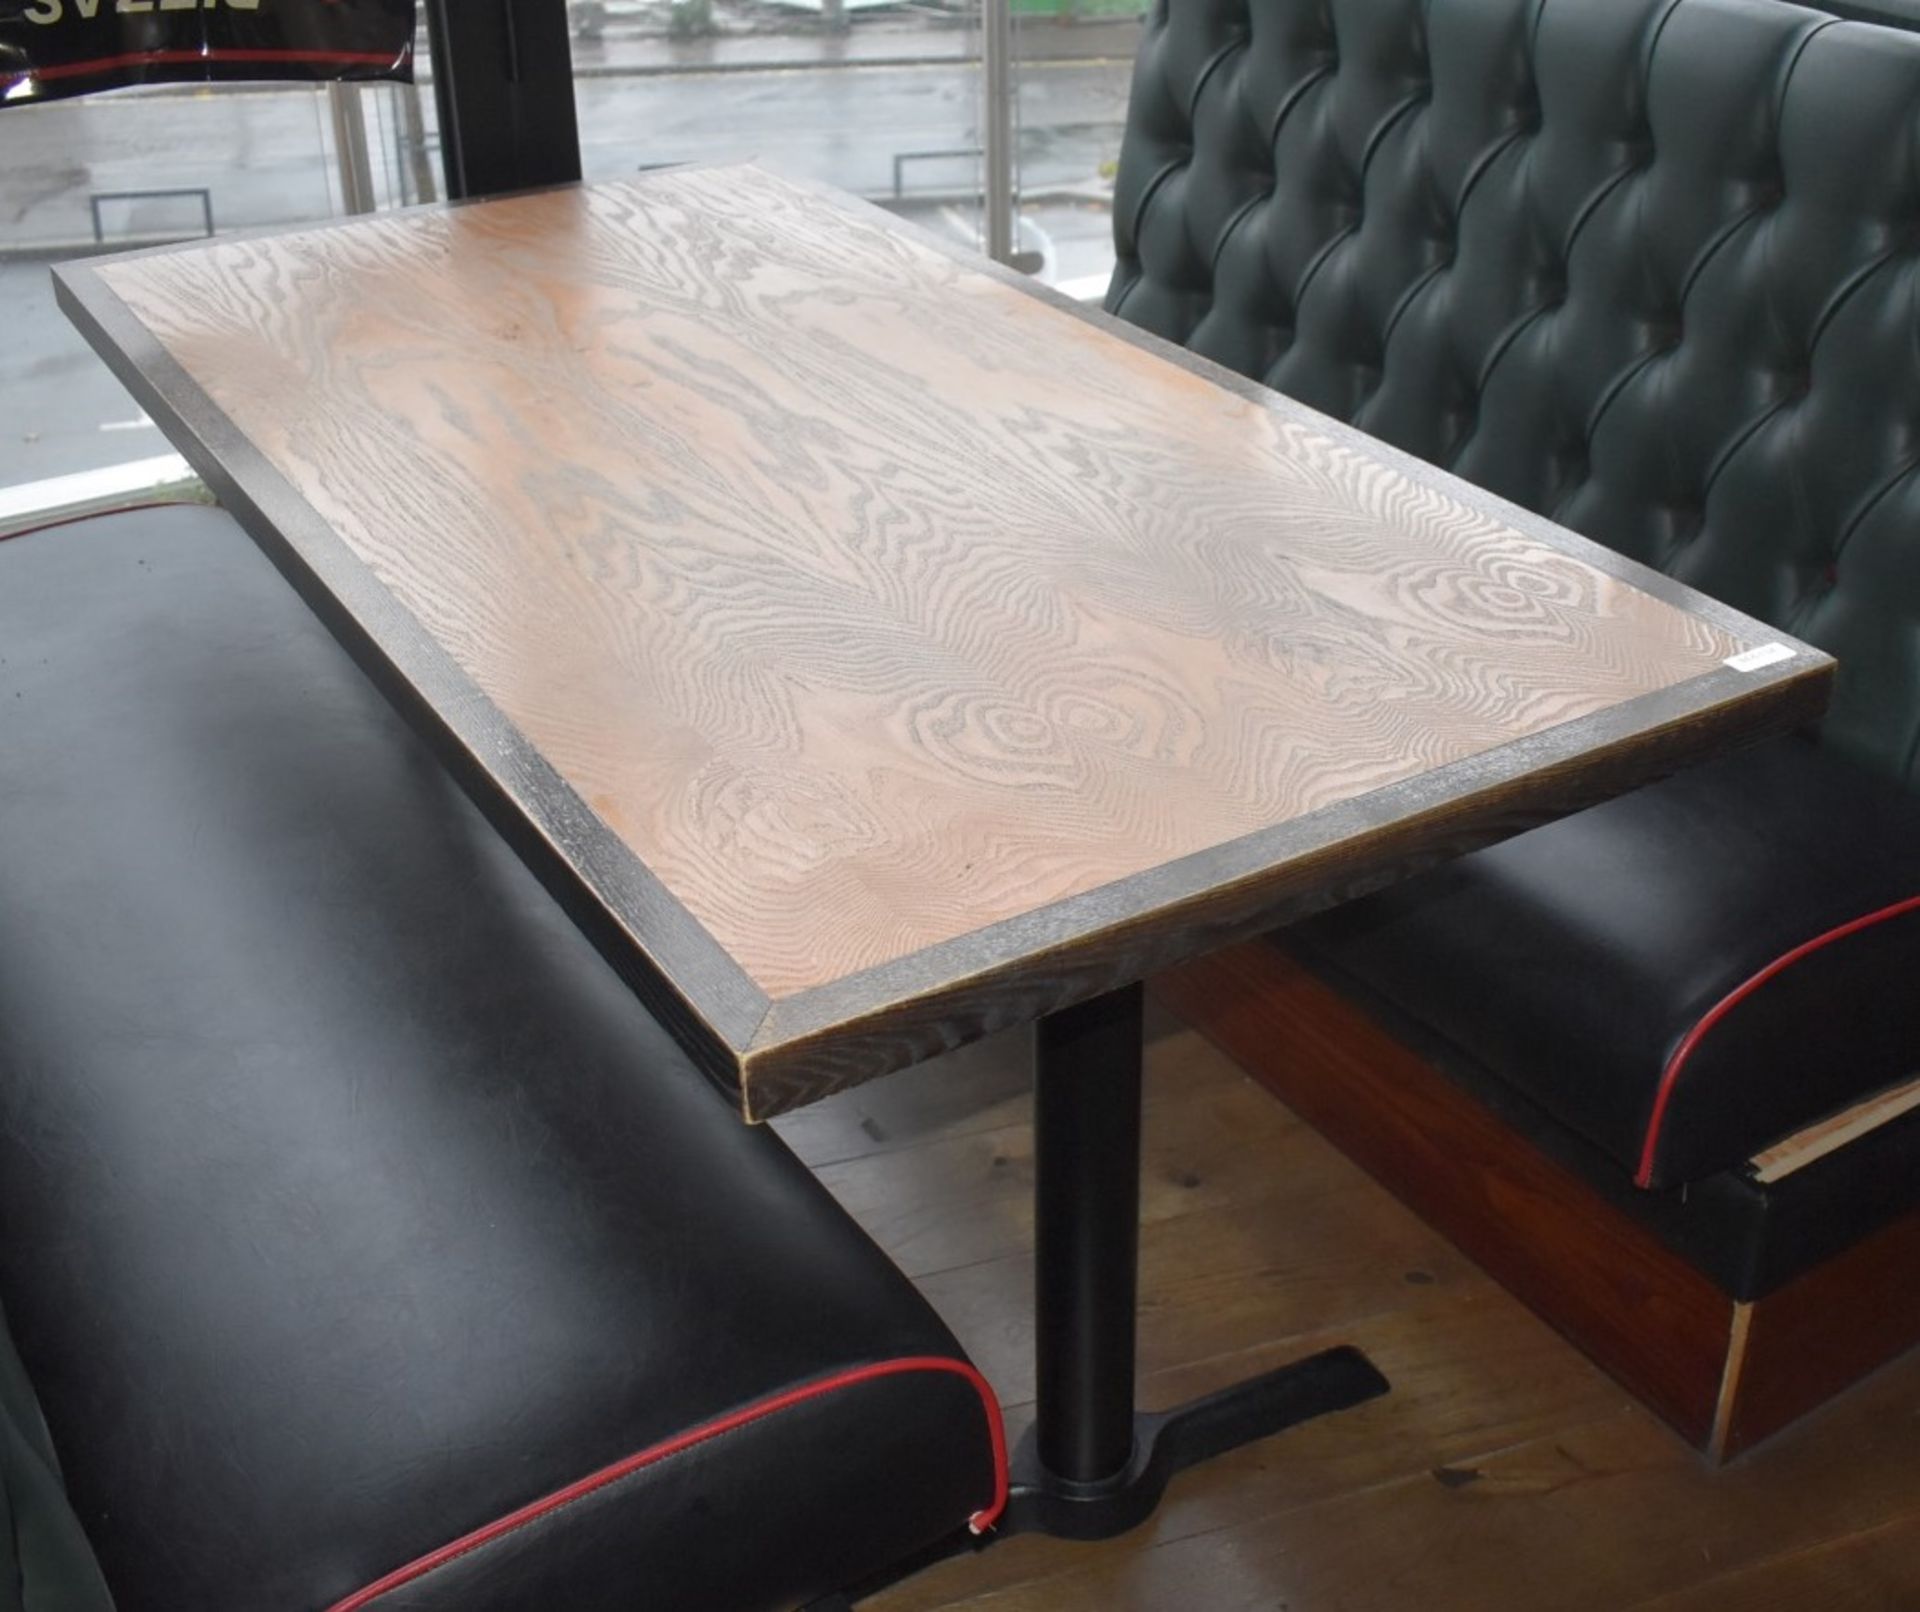 1 x Rectangular Restaurant Table - Seats Upto 4 Persons - Two Tone Wooden Top and Cast Iron Bases - Image 4 of 5